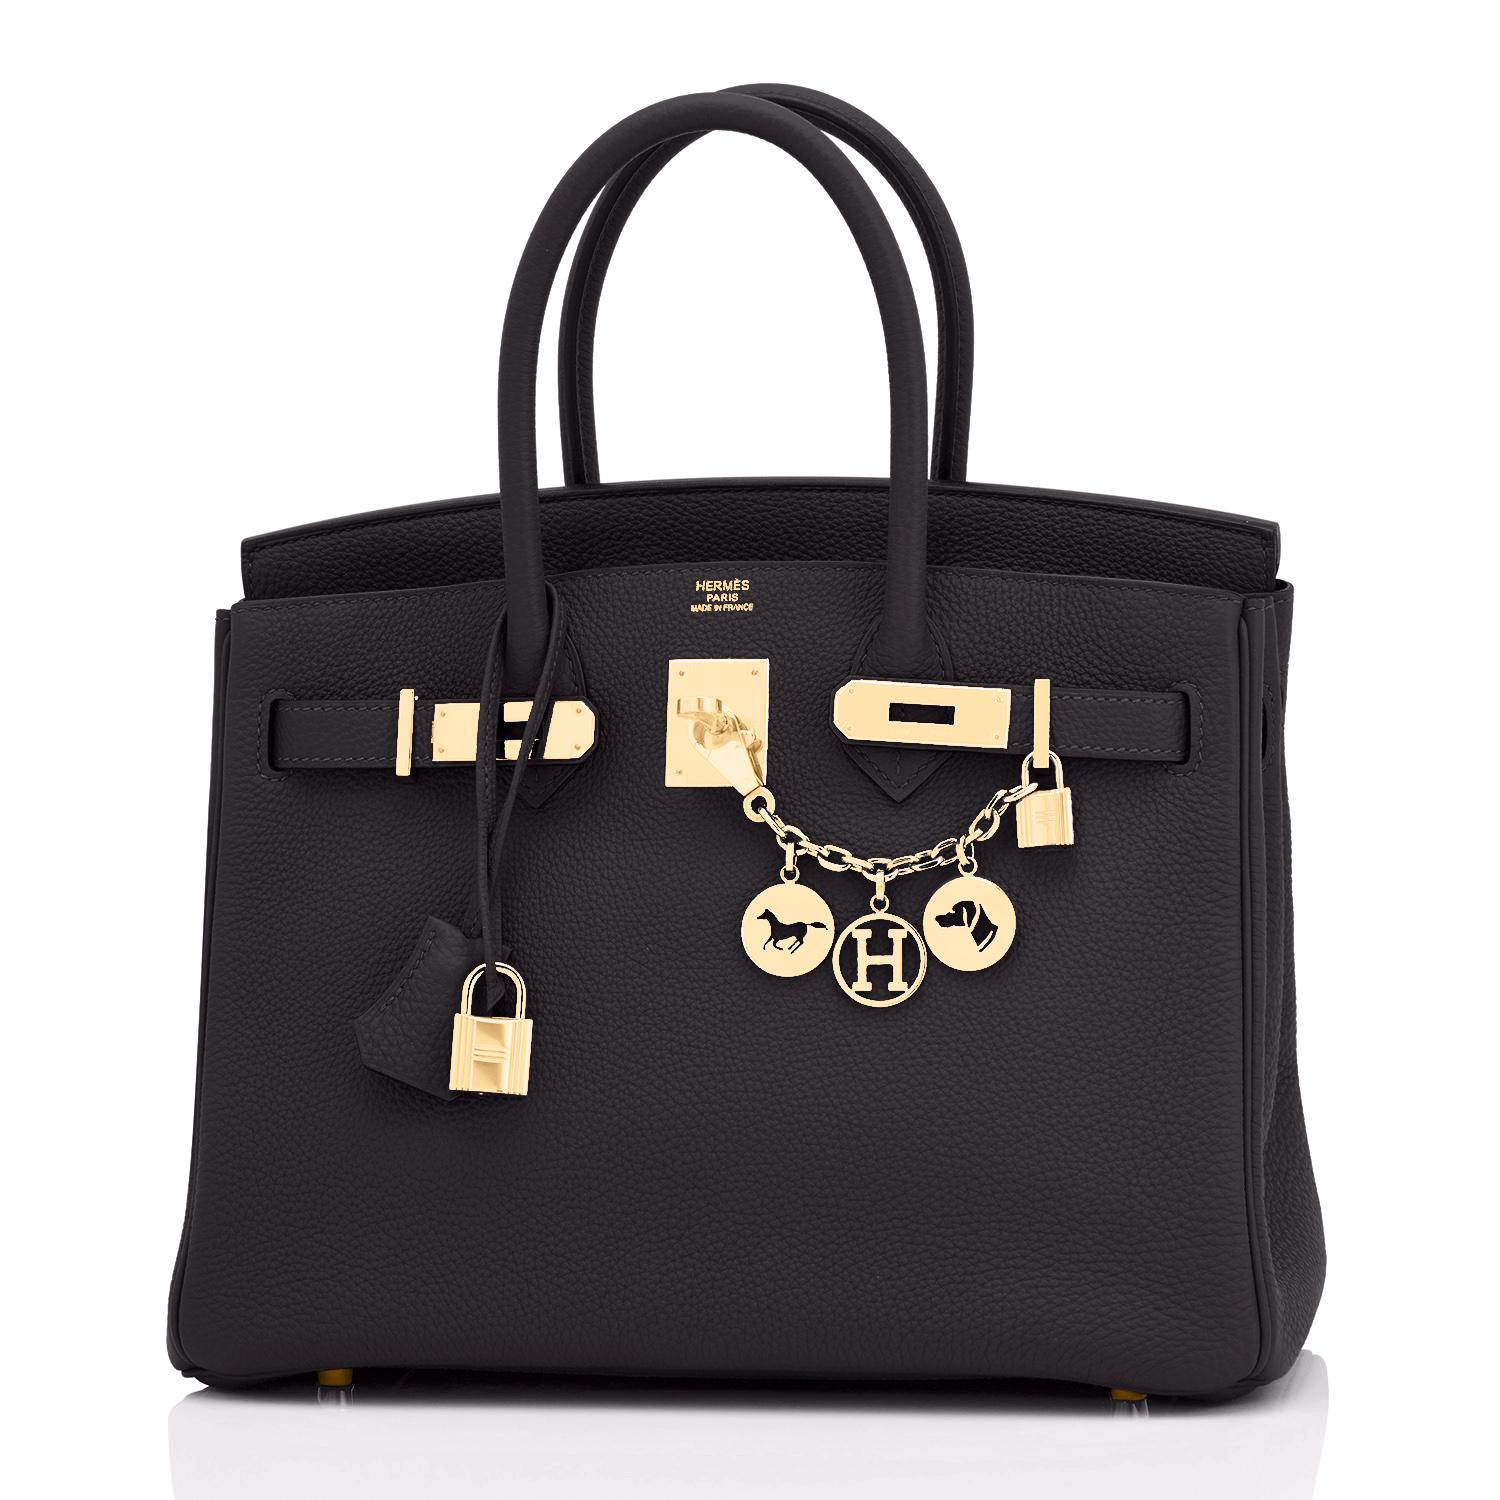 Chicjoy is pleased to present this Hermes Birkin 30cm Black Togo Gold Hardware Bag
Brand New in Box. Store Fresh. Pristine Condition (with plastic on hardware)
Perfect gift! Comes with lock, keys, clochette, sleeper, raincoat, and orange Hermes box.